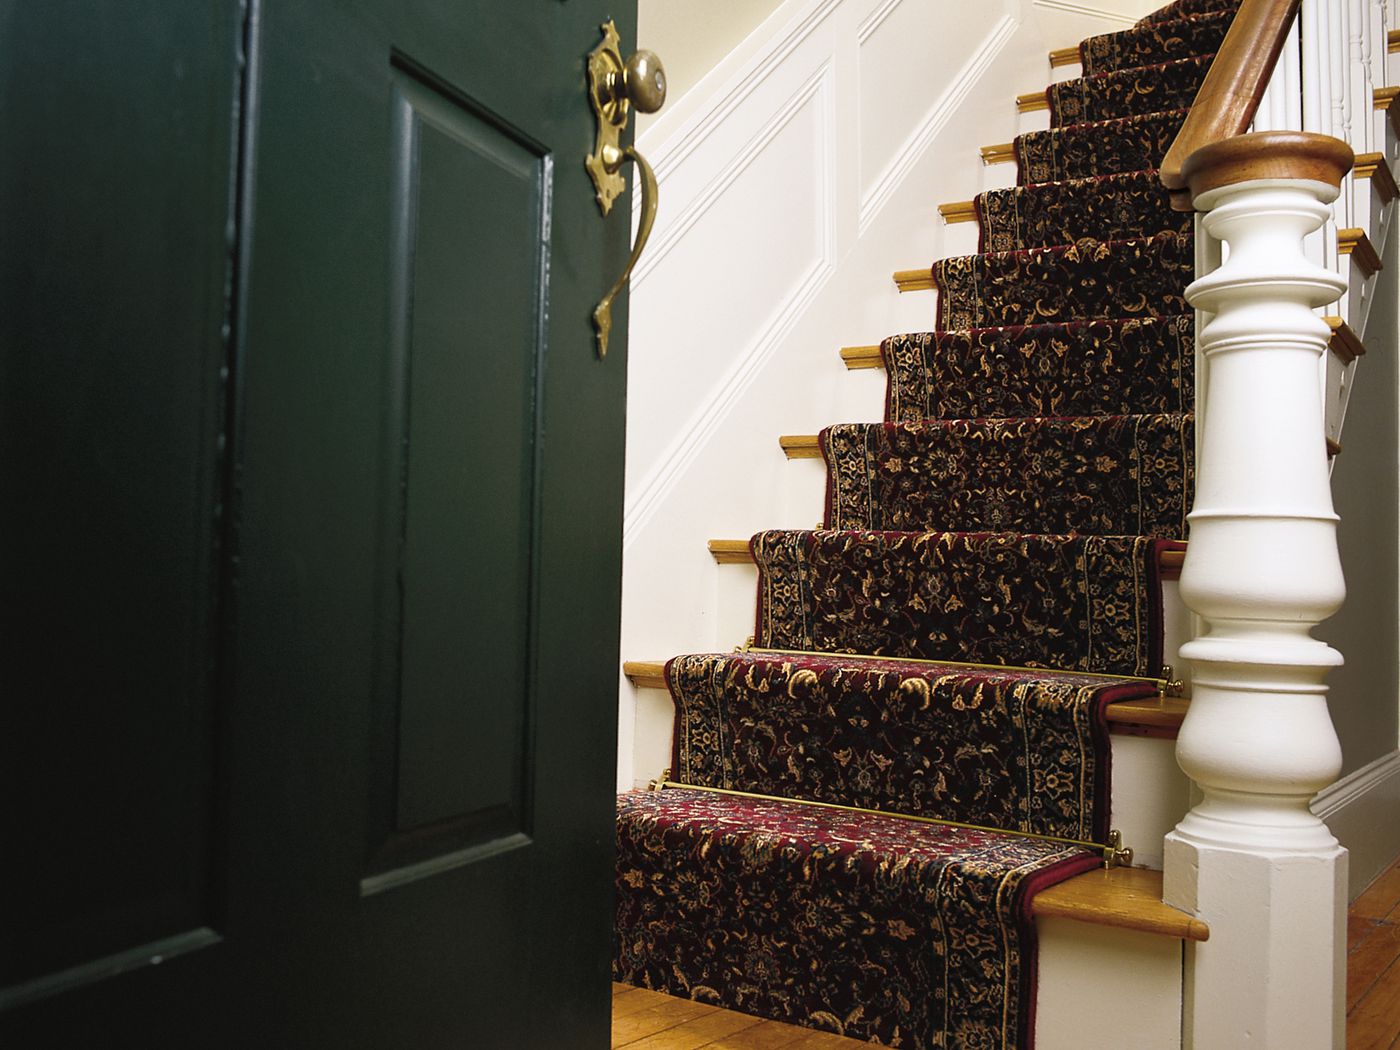 How Do You Nail Carpet Stair Treads